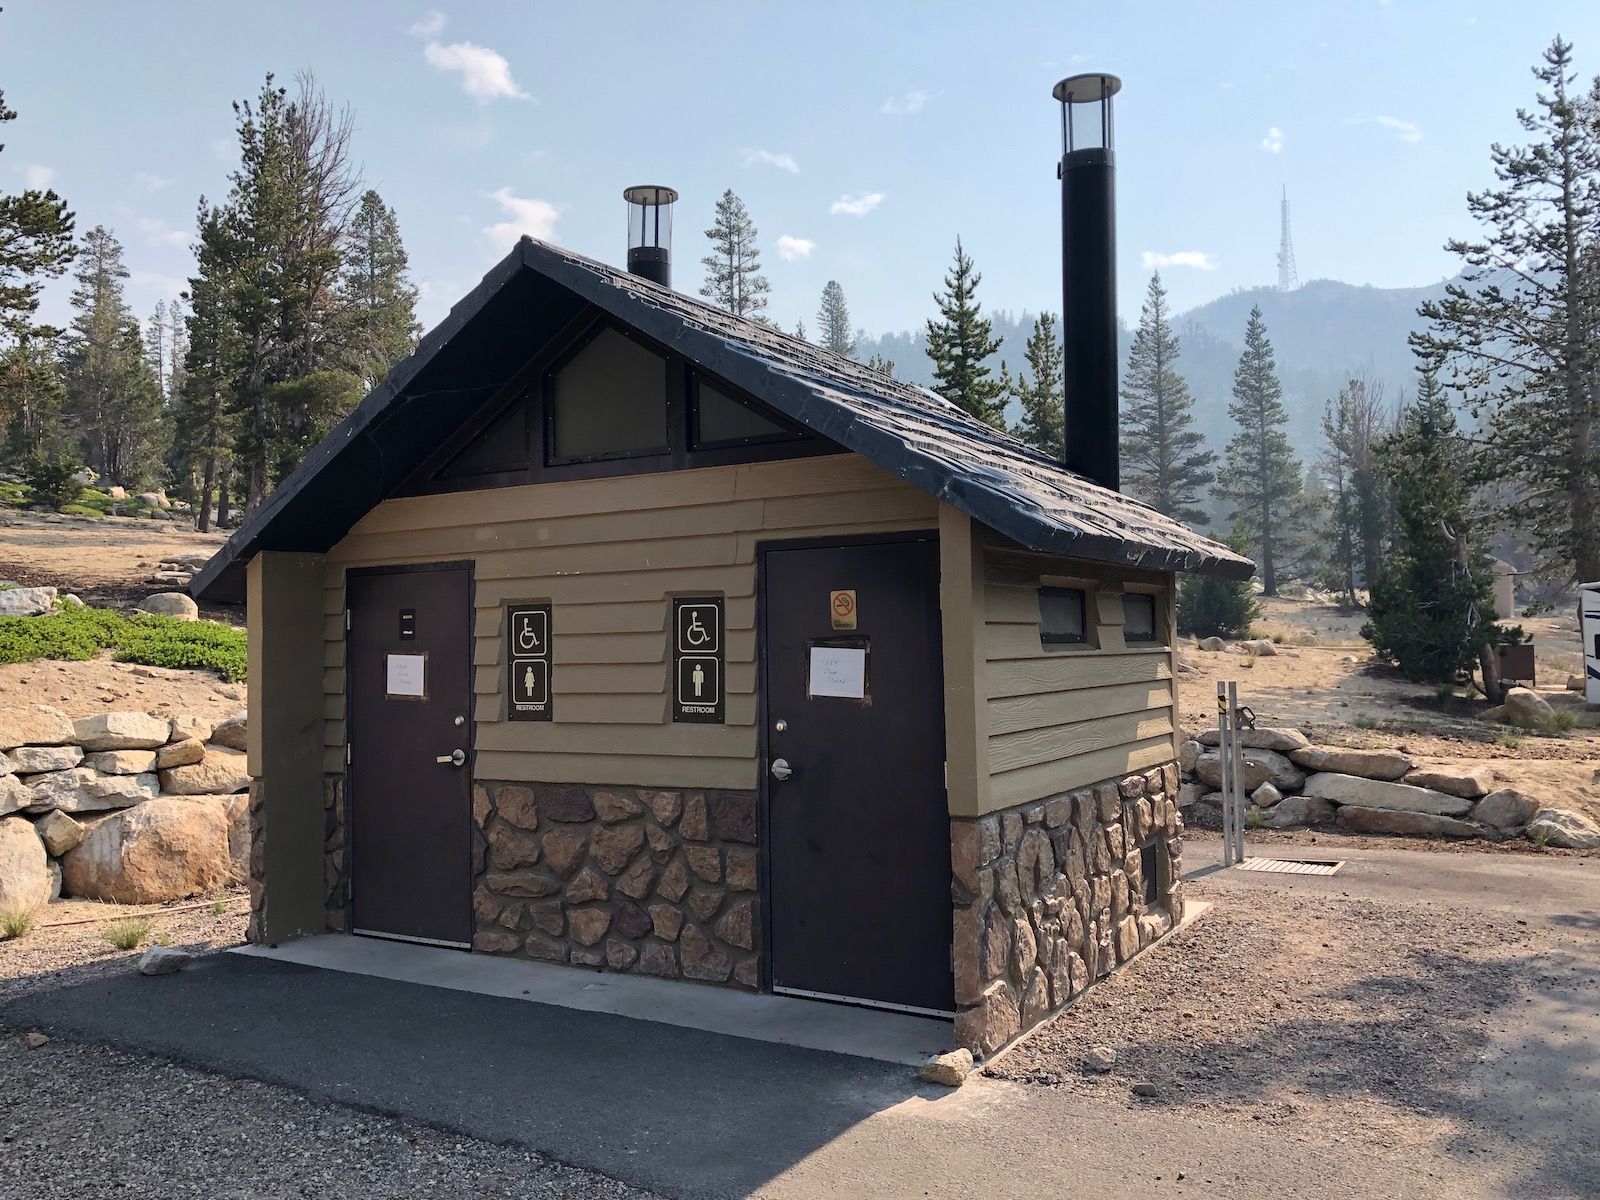 There was a toilet and a trashcan at Mt. Rose campground.